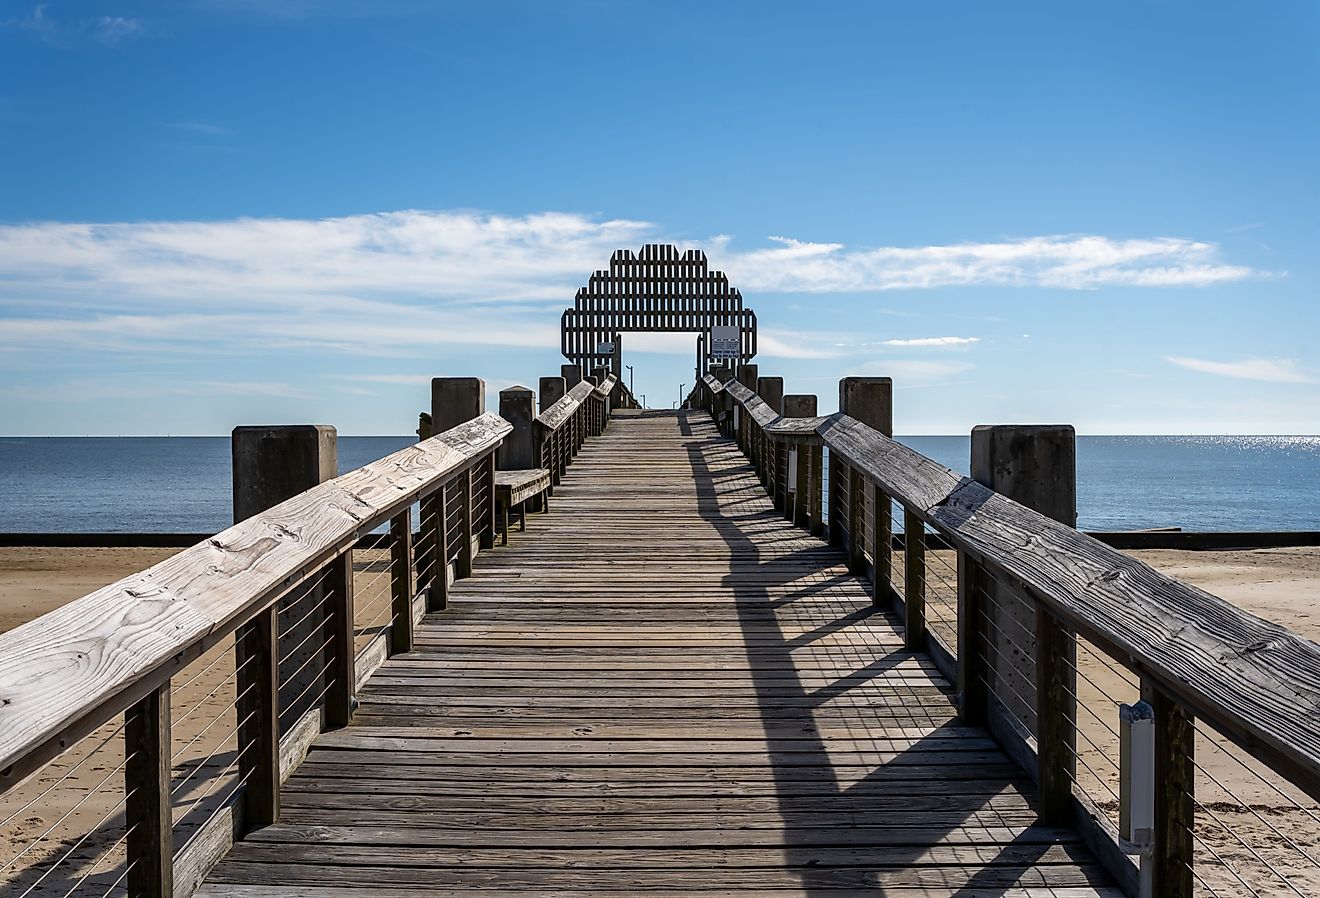 Wooden bridge on the beach in Pascagoula, Mississippi. Image credit Engi Caribe via Shutterstock.